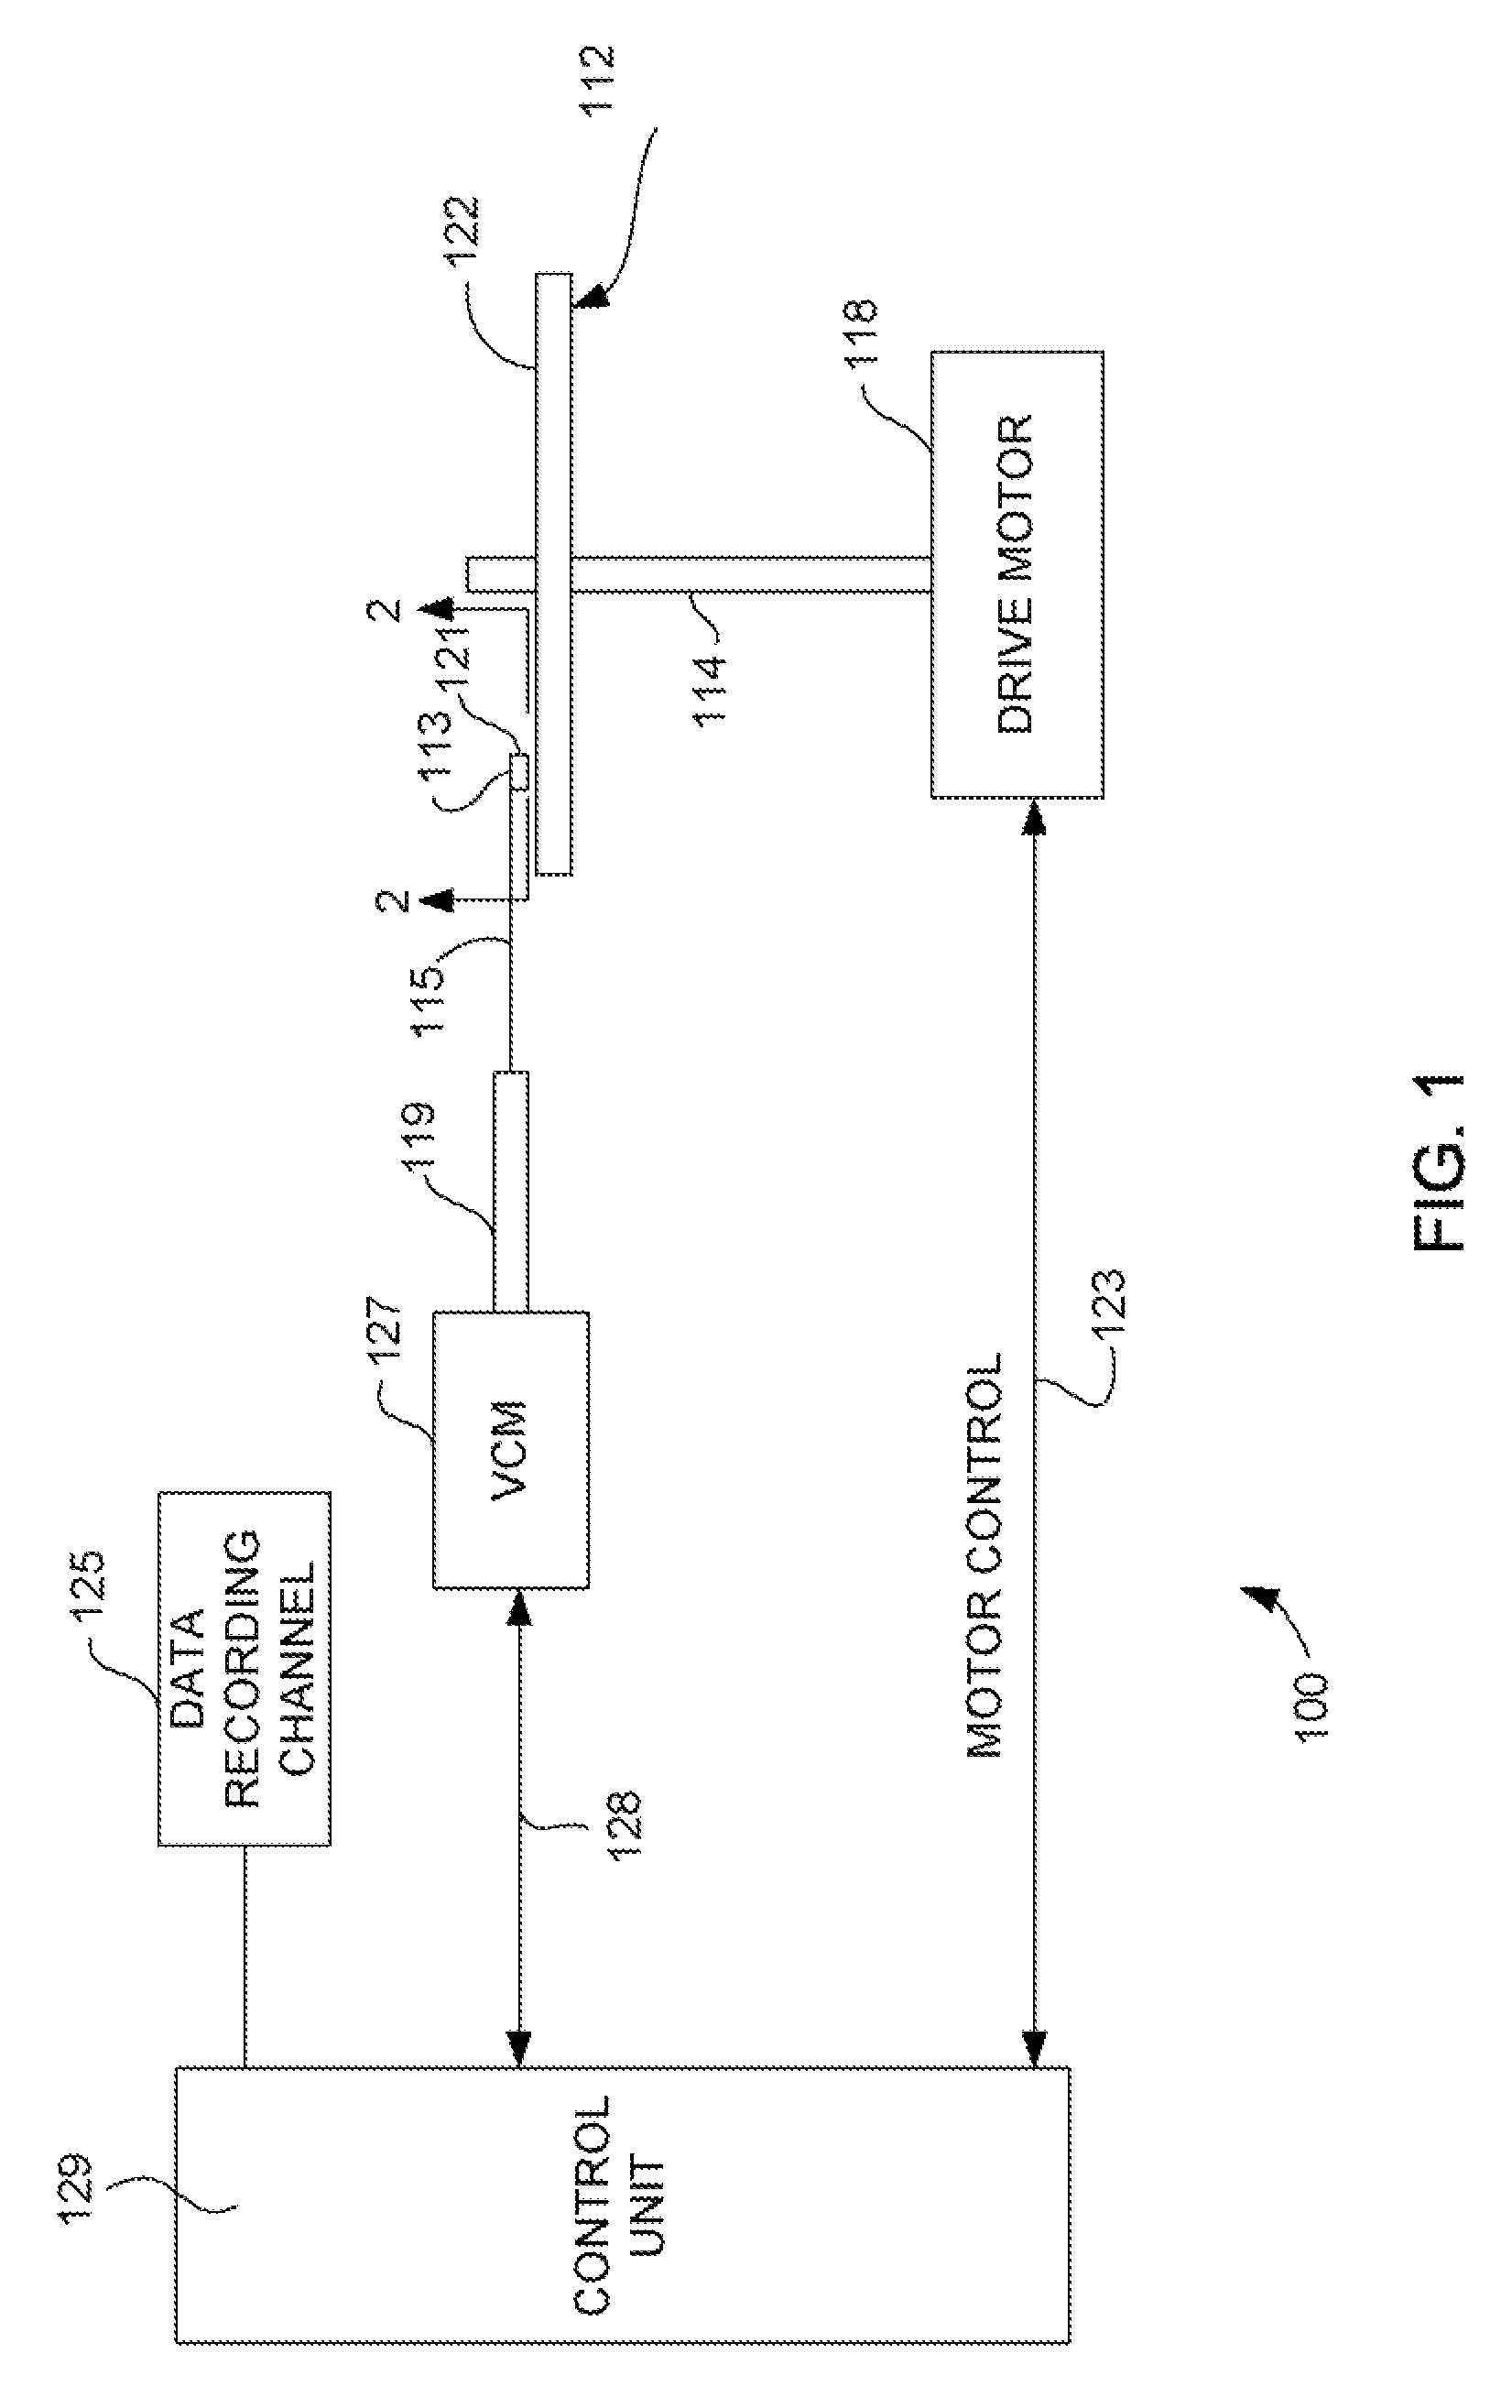 Magnetic write head with helical coil structure using multiple materials